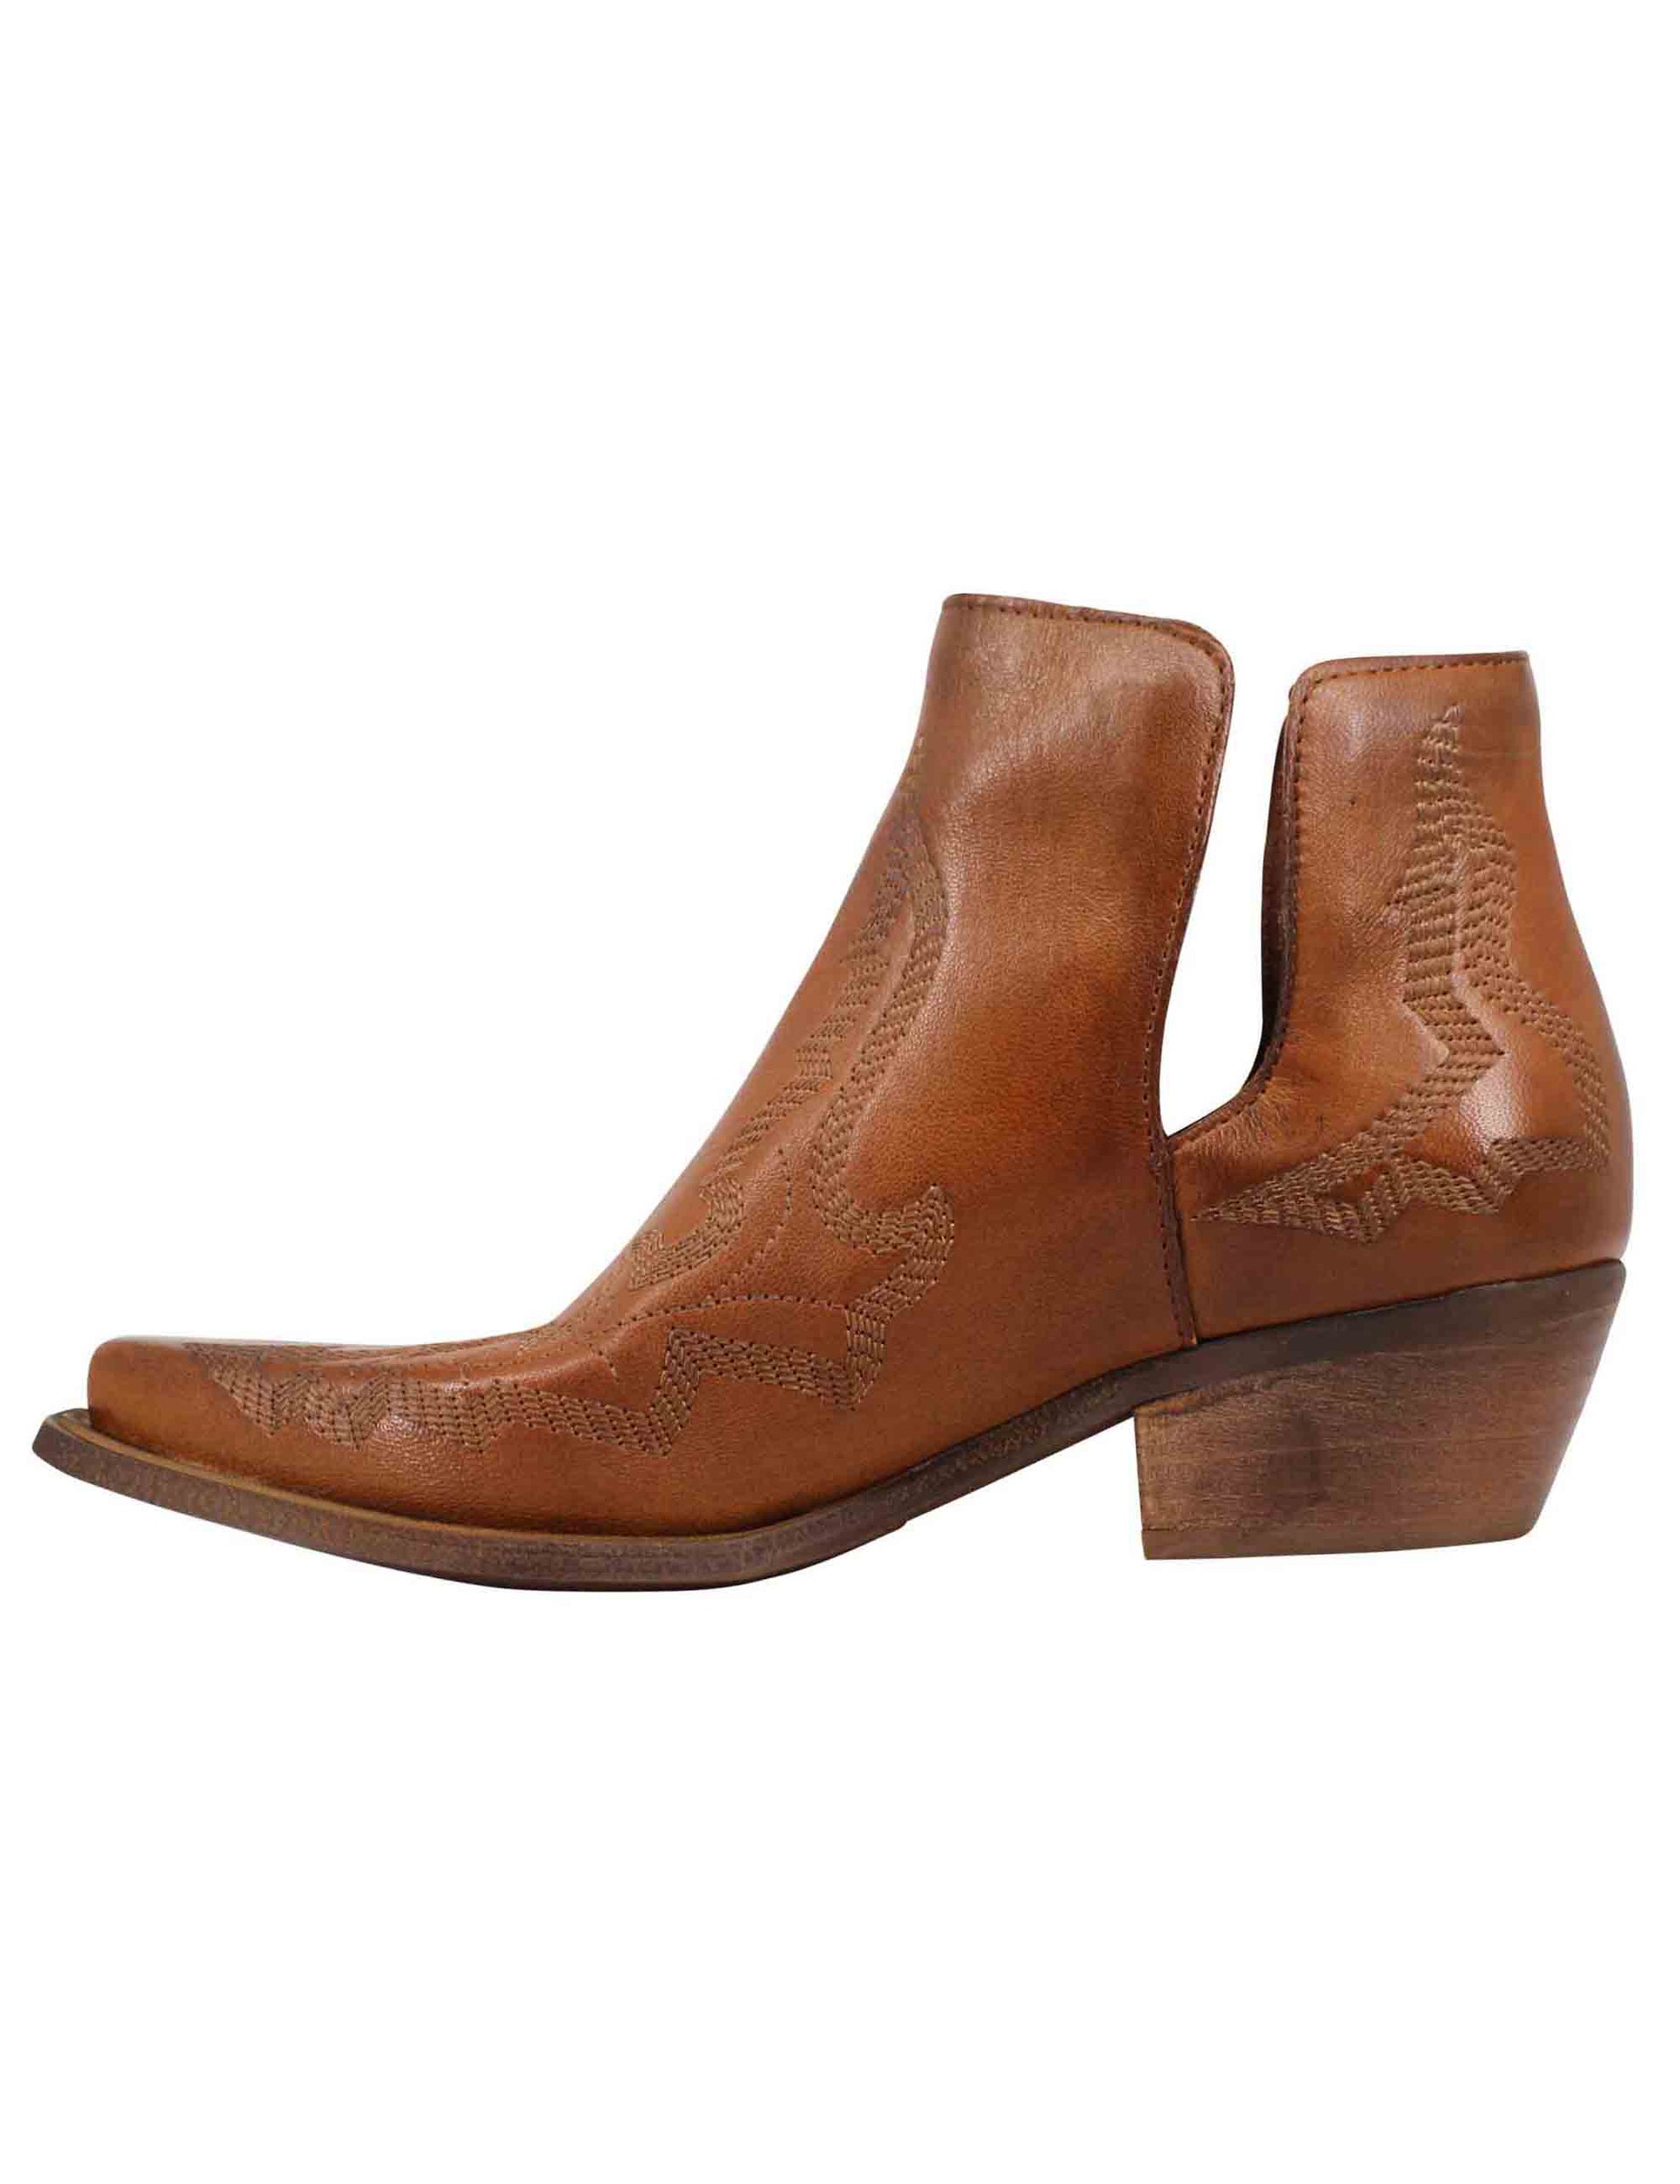 Women's Texan boots in tan leather with stitching